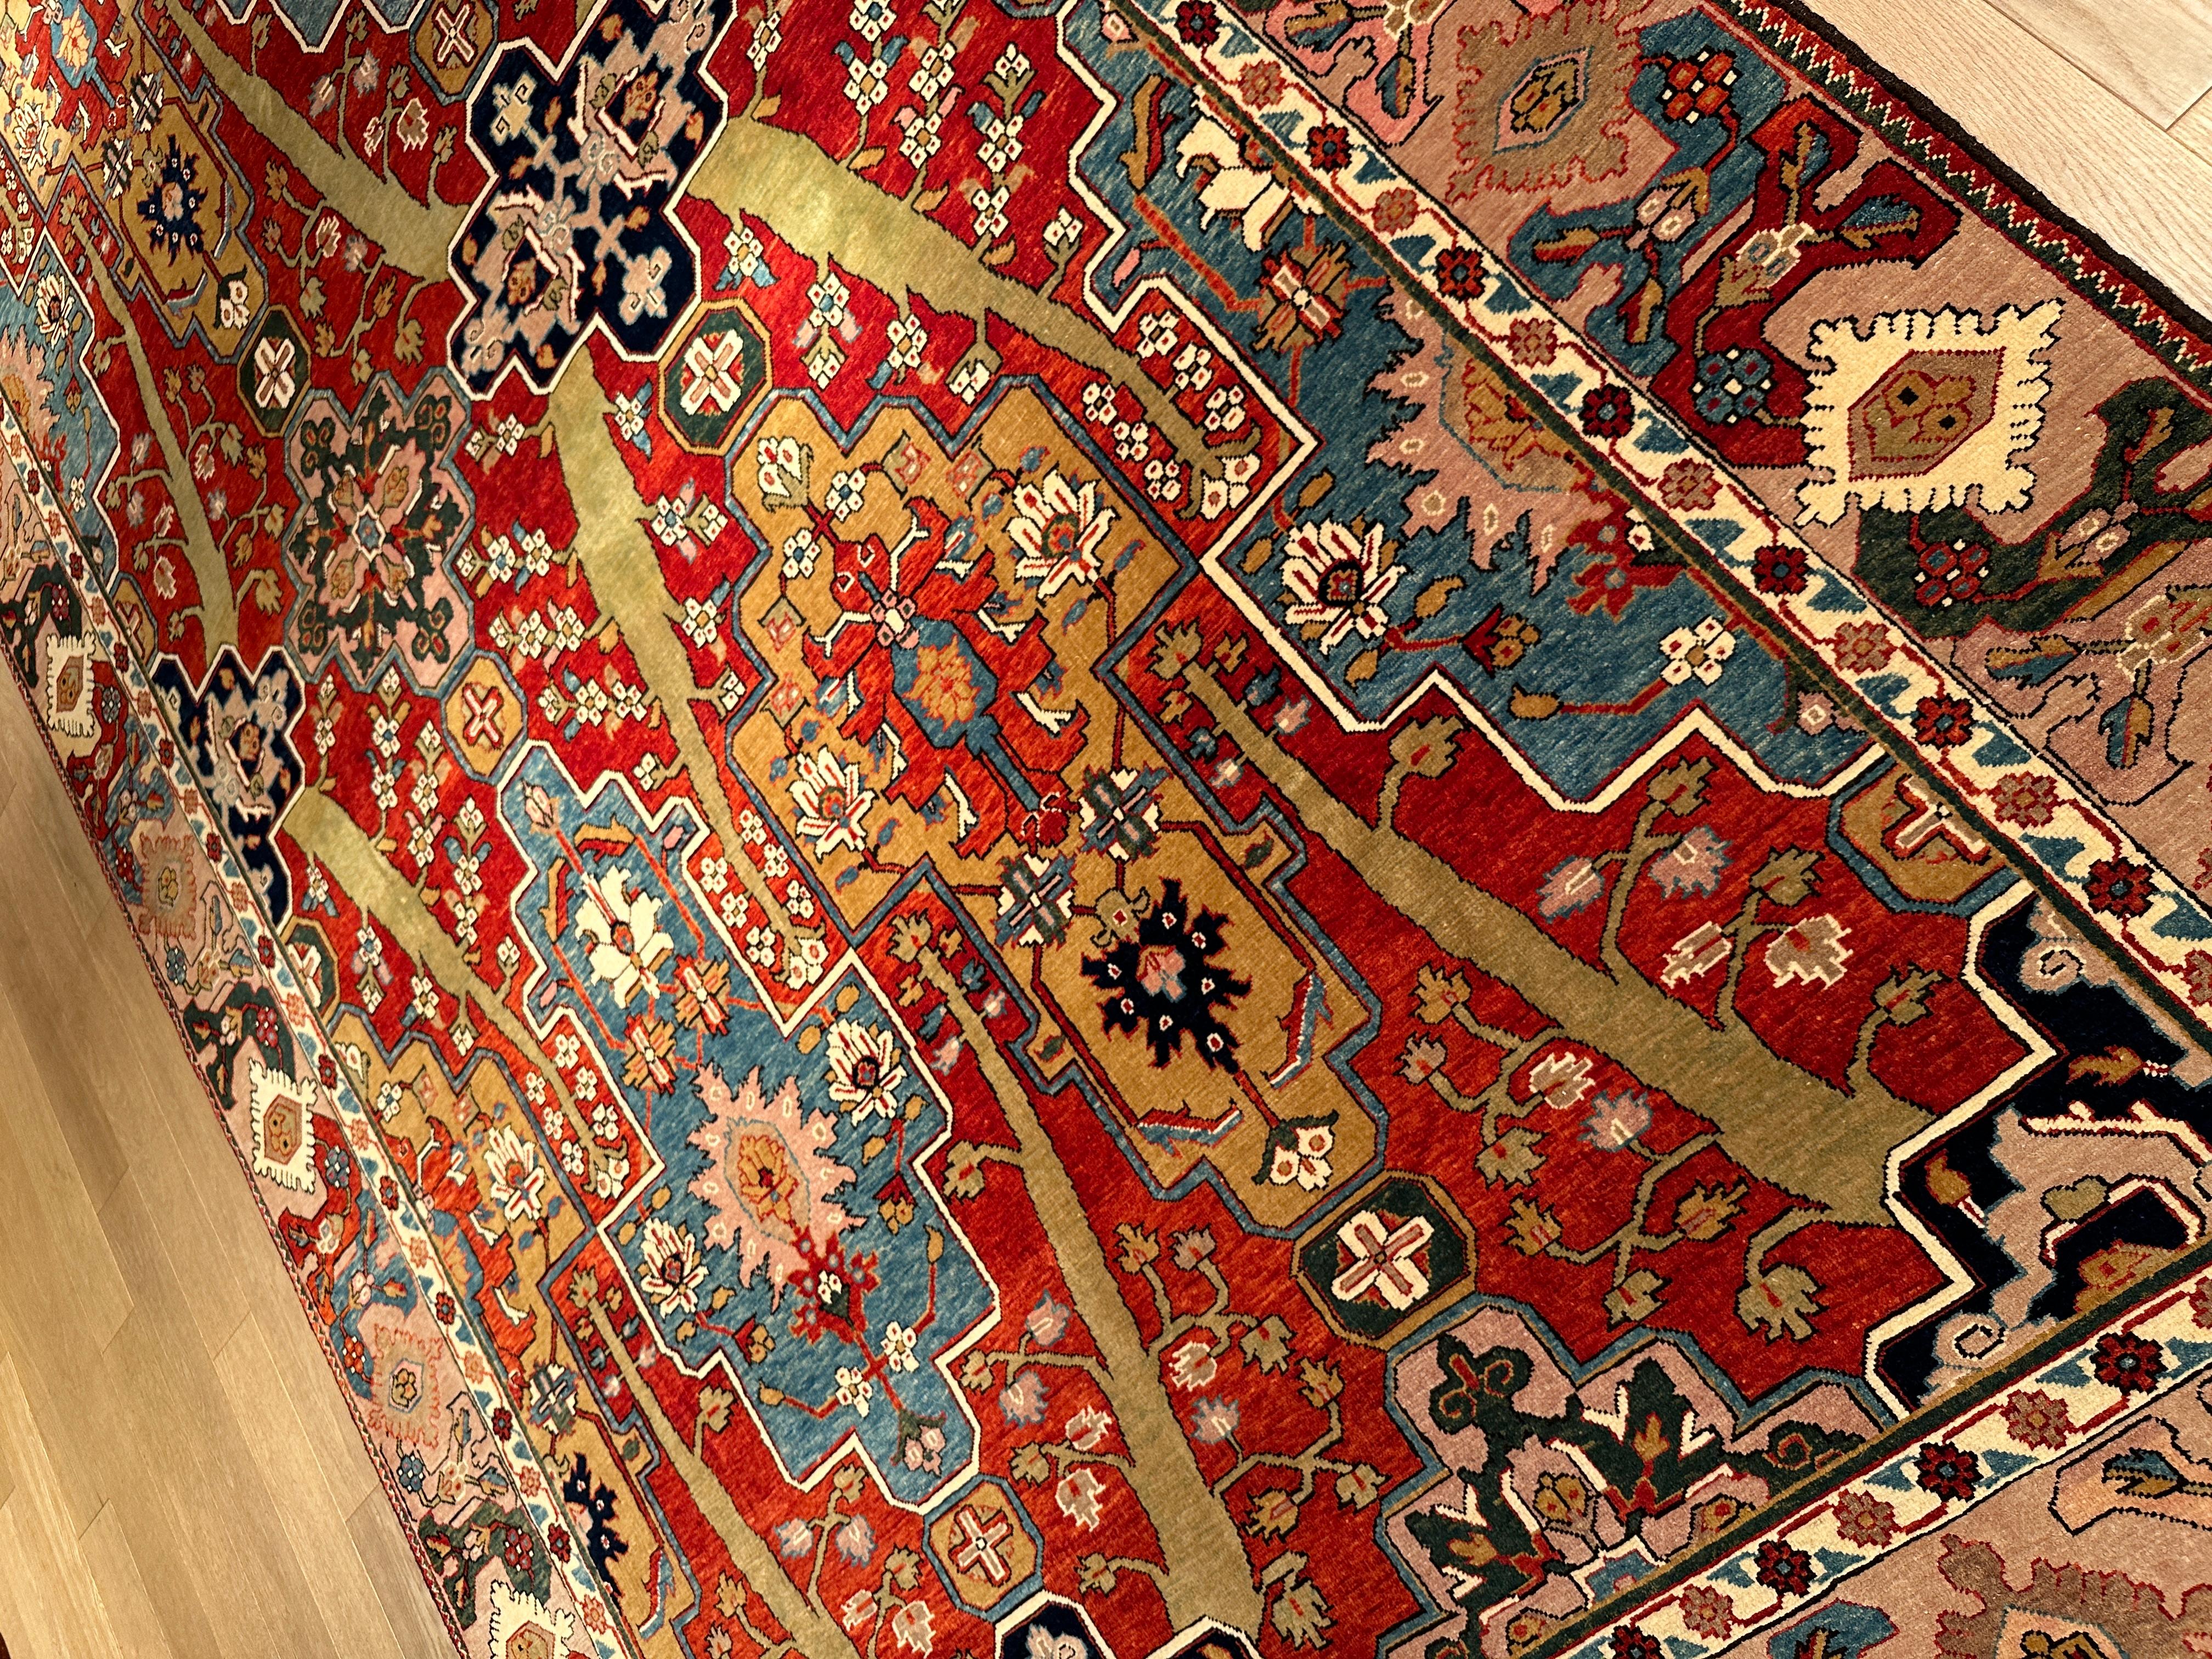 The source of carpet comes from the book Orient Star – A Carpet Collection, E. Heinrich Kirchheim, Hali Publications Ltd, 1993 nr.64 and Islamic Carpets, Joseph V. McMullan, Near Eastern Art Research Center Inc., New York 1965 nr.26. This is a long